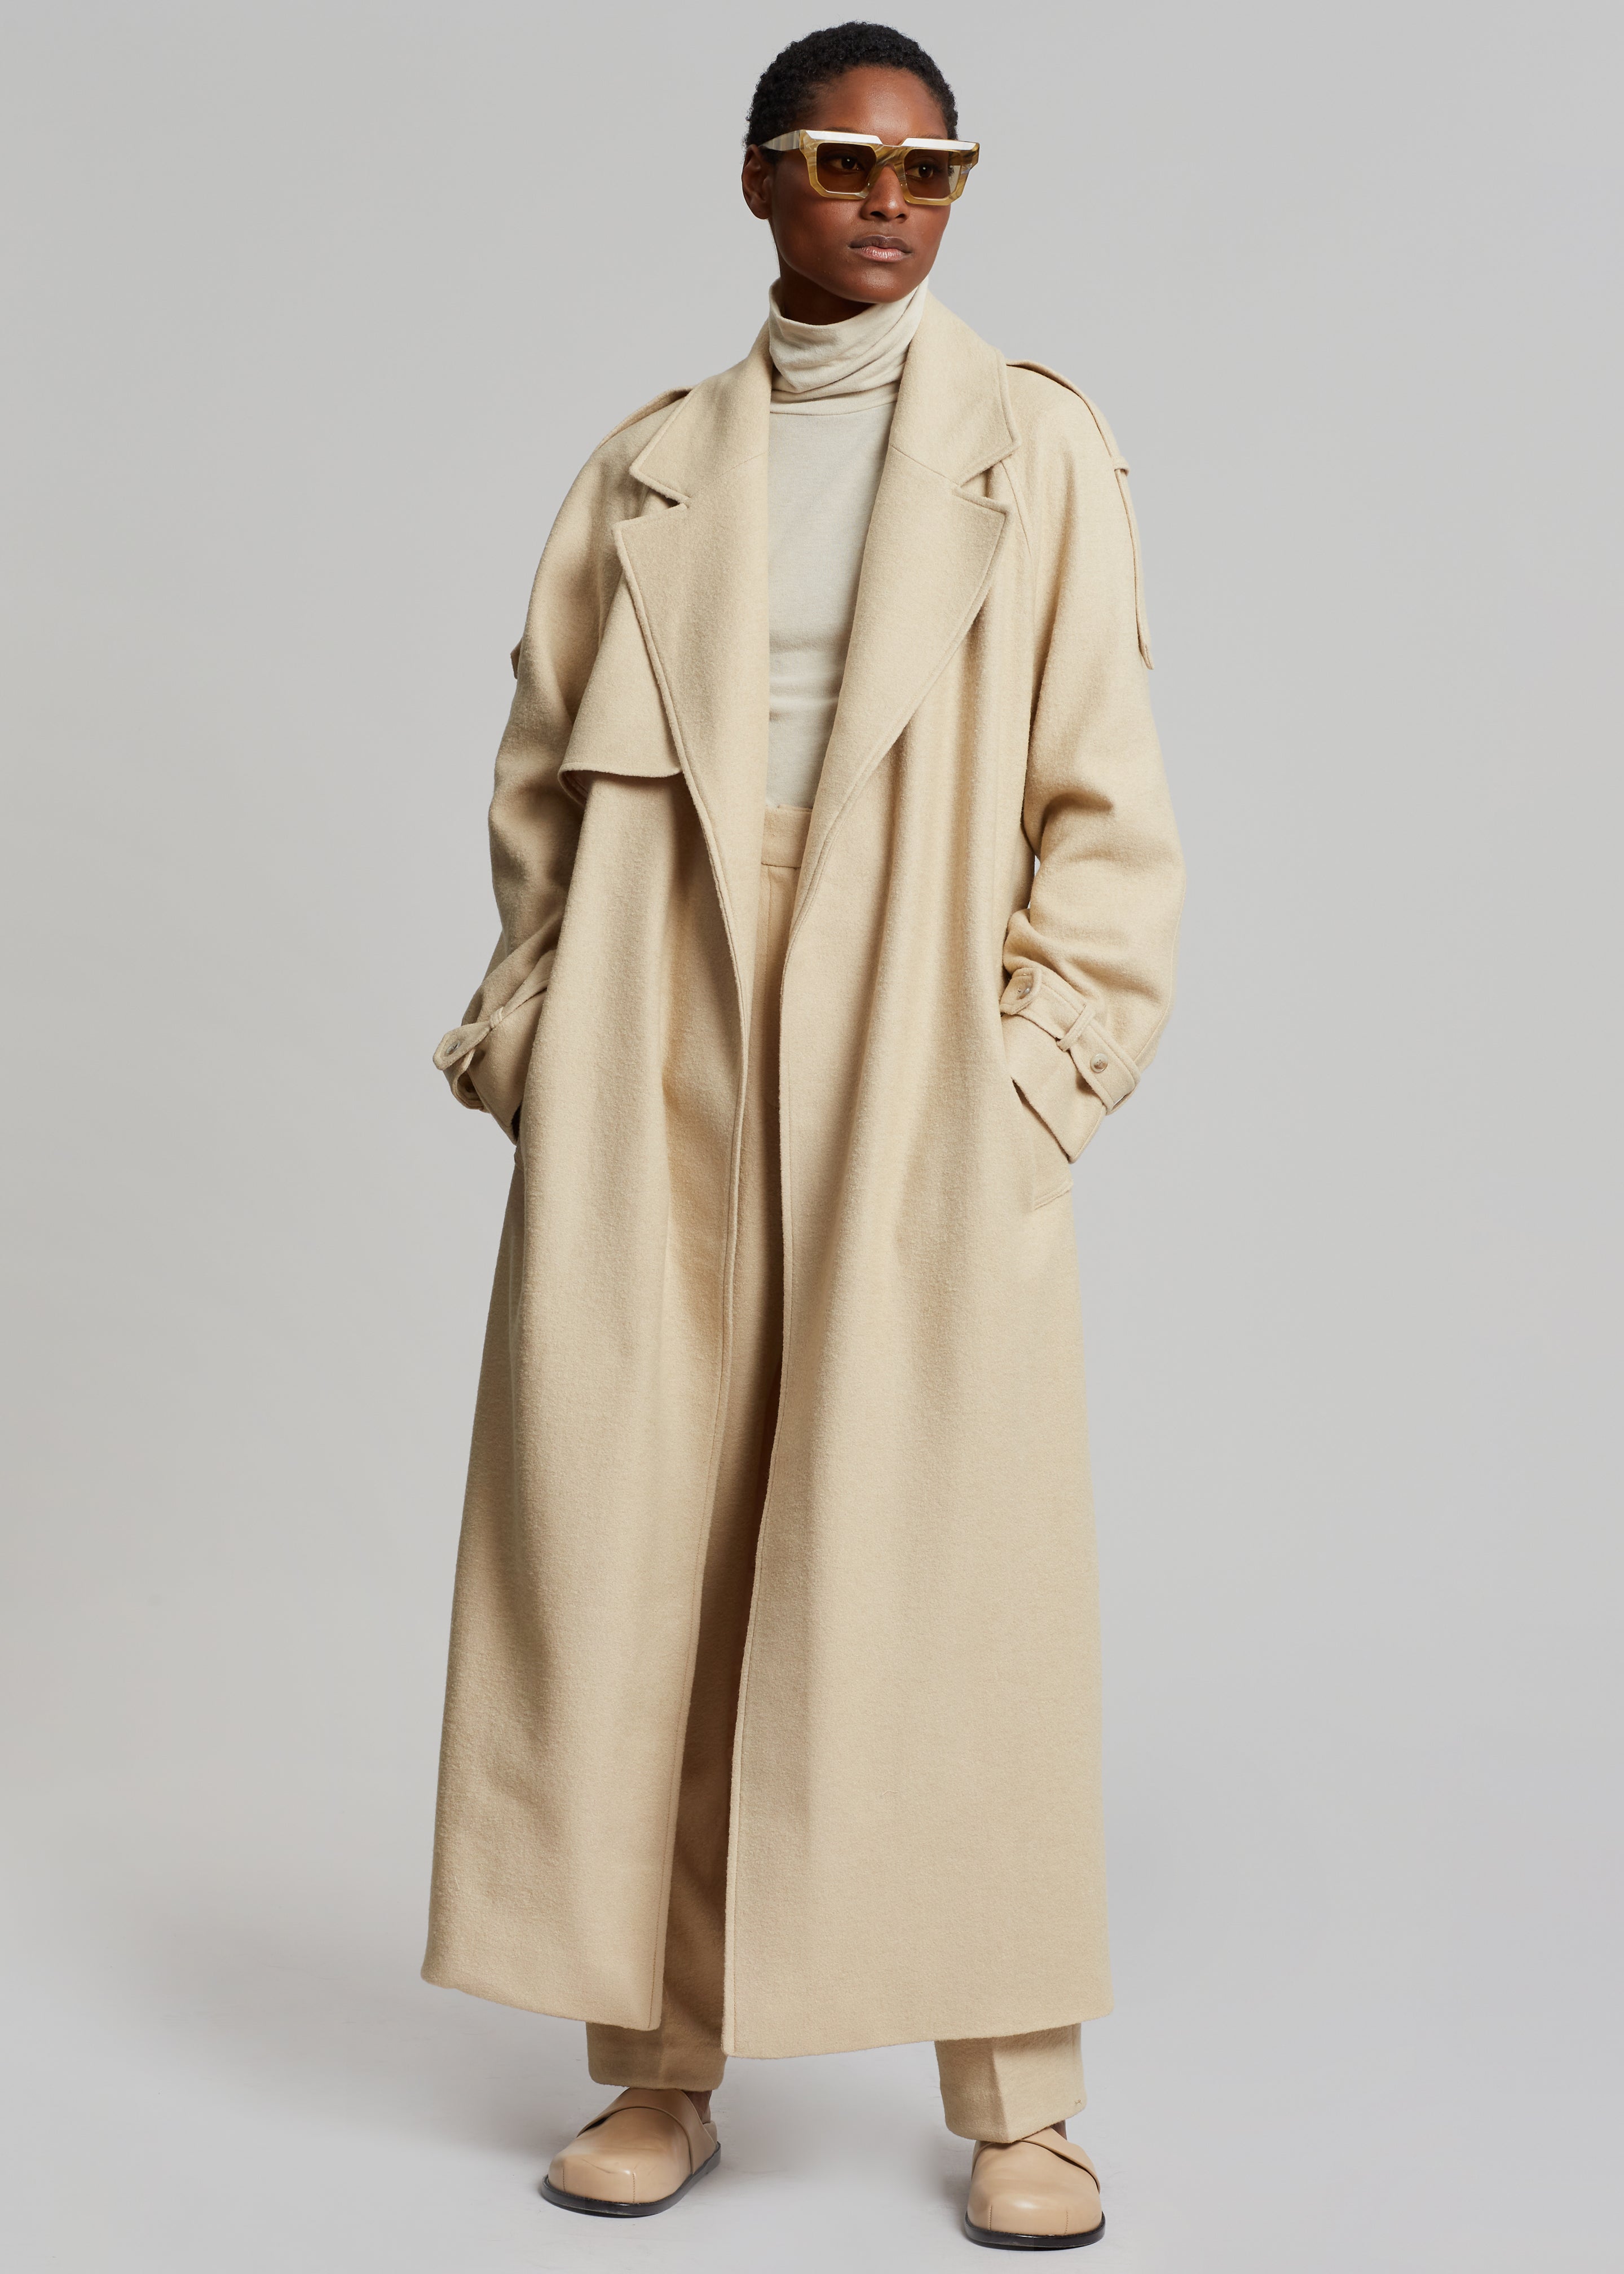 Suzanne Boiled Wool Trench Coat - Beige – The Frankie Shop